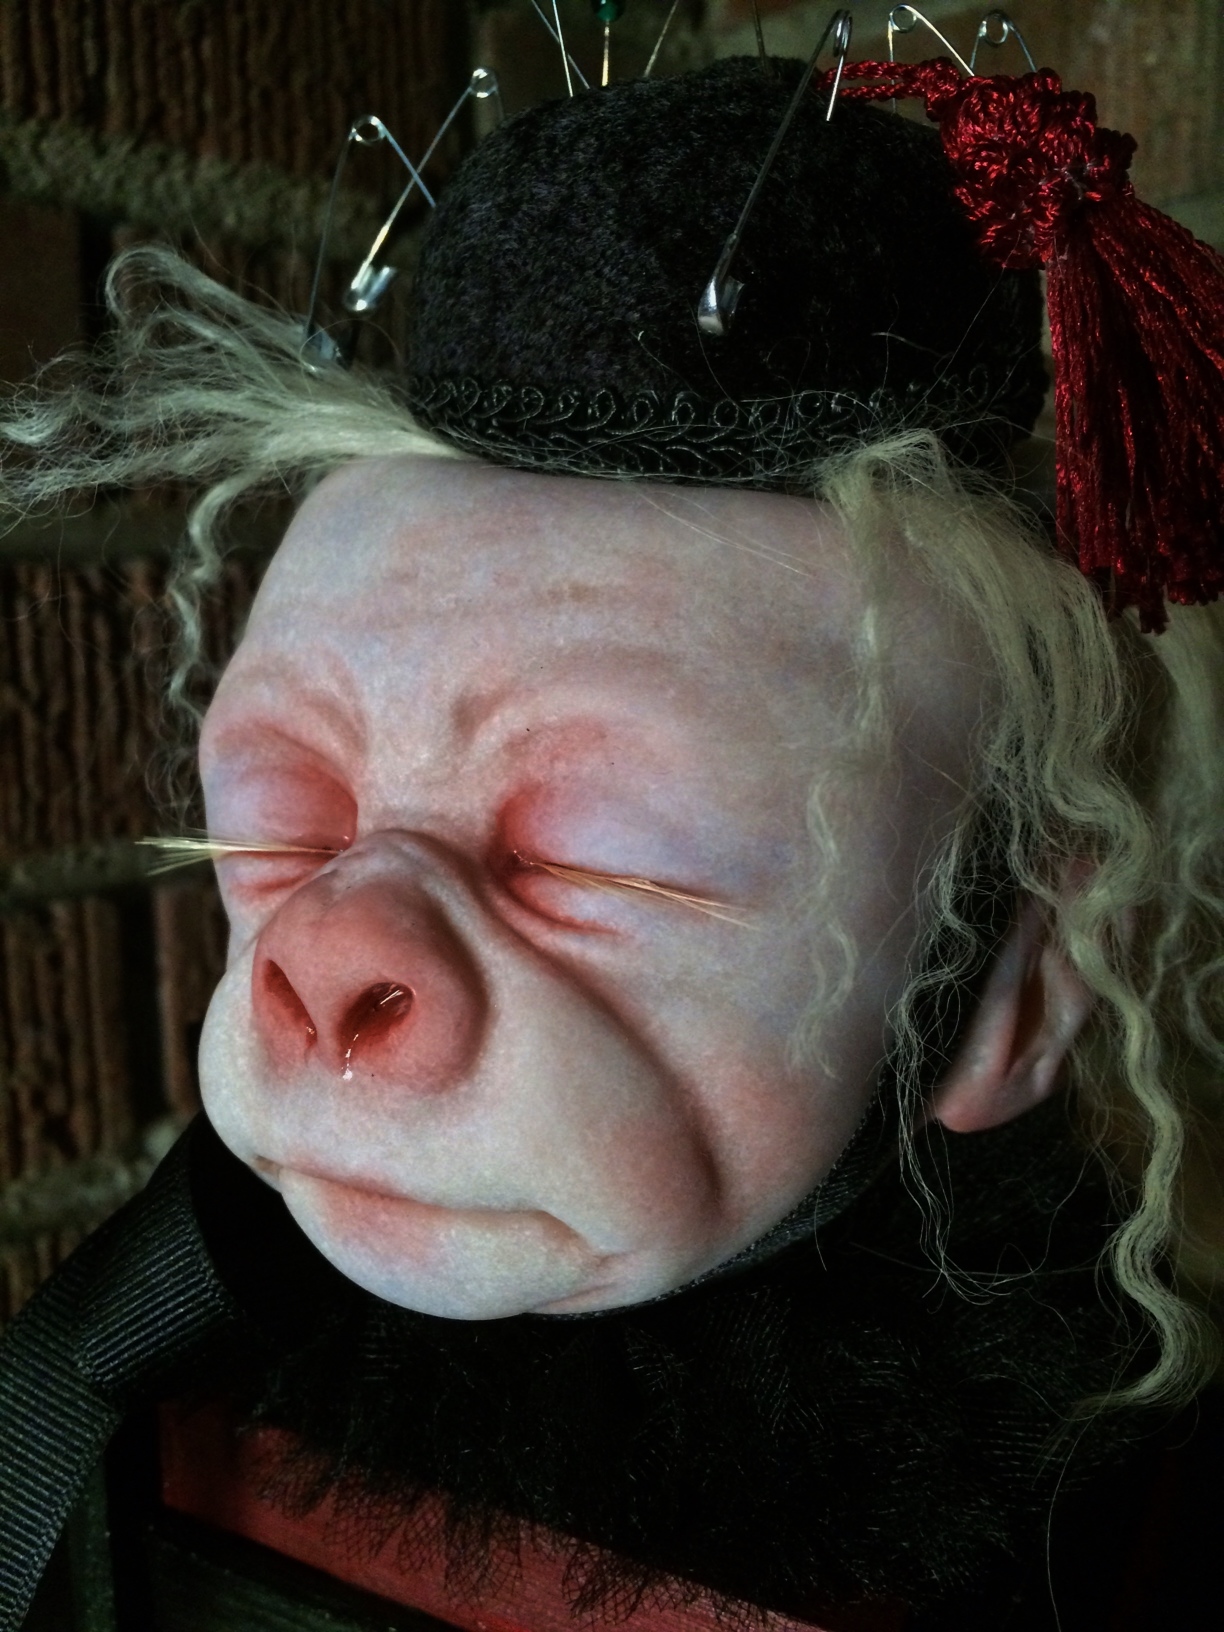 close-up pale, albino gorilla face doll head with closed eyes and blond hair wearing a black pin cushion with a red tassel on his head